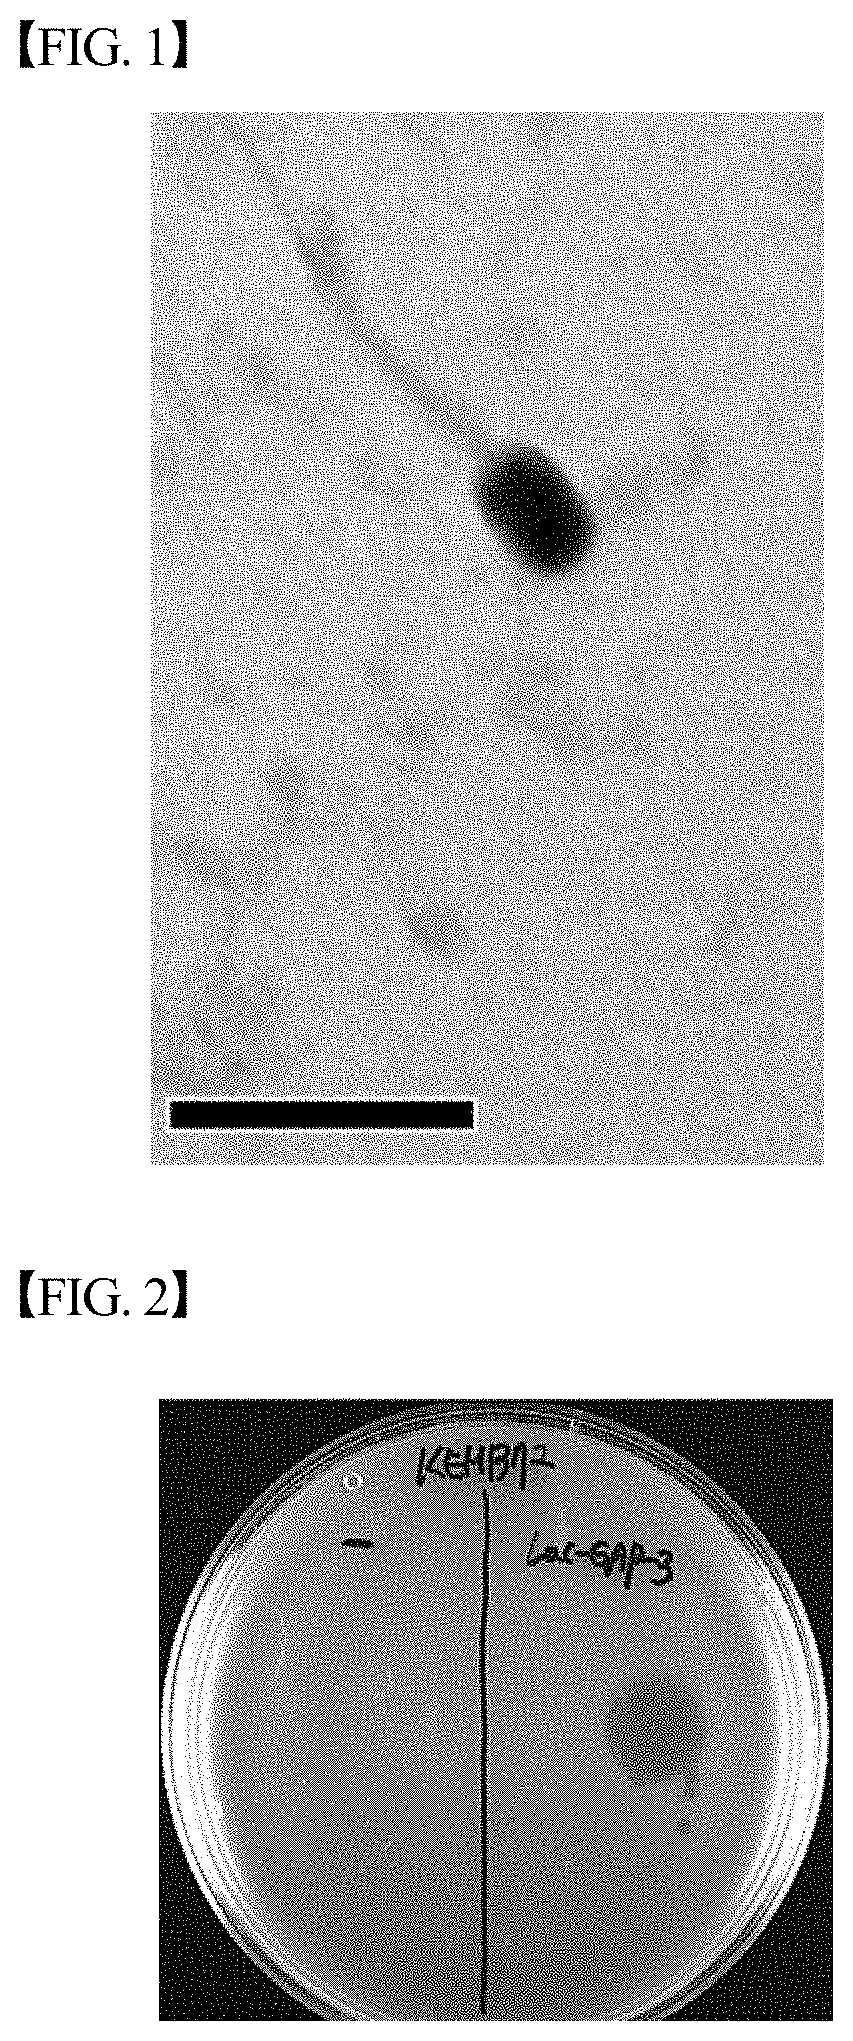 Novel lactococcusgarvieae bacteriophage lac-gap-3 and use thereof in inhibiting proliferation of lactococcusgarvieae bacteria